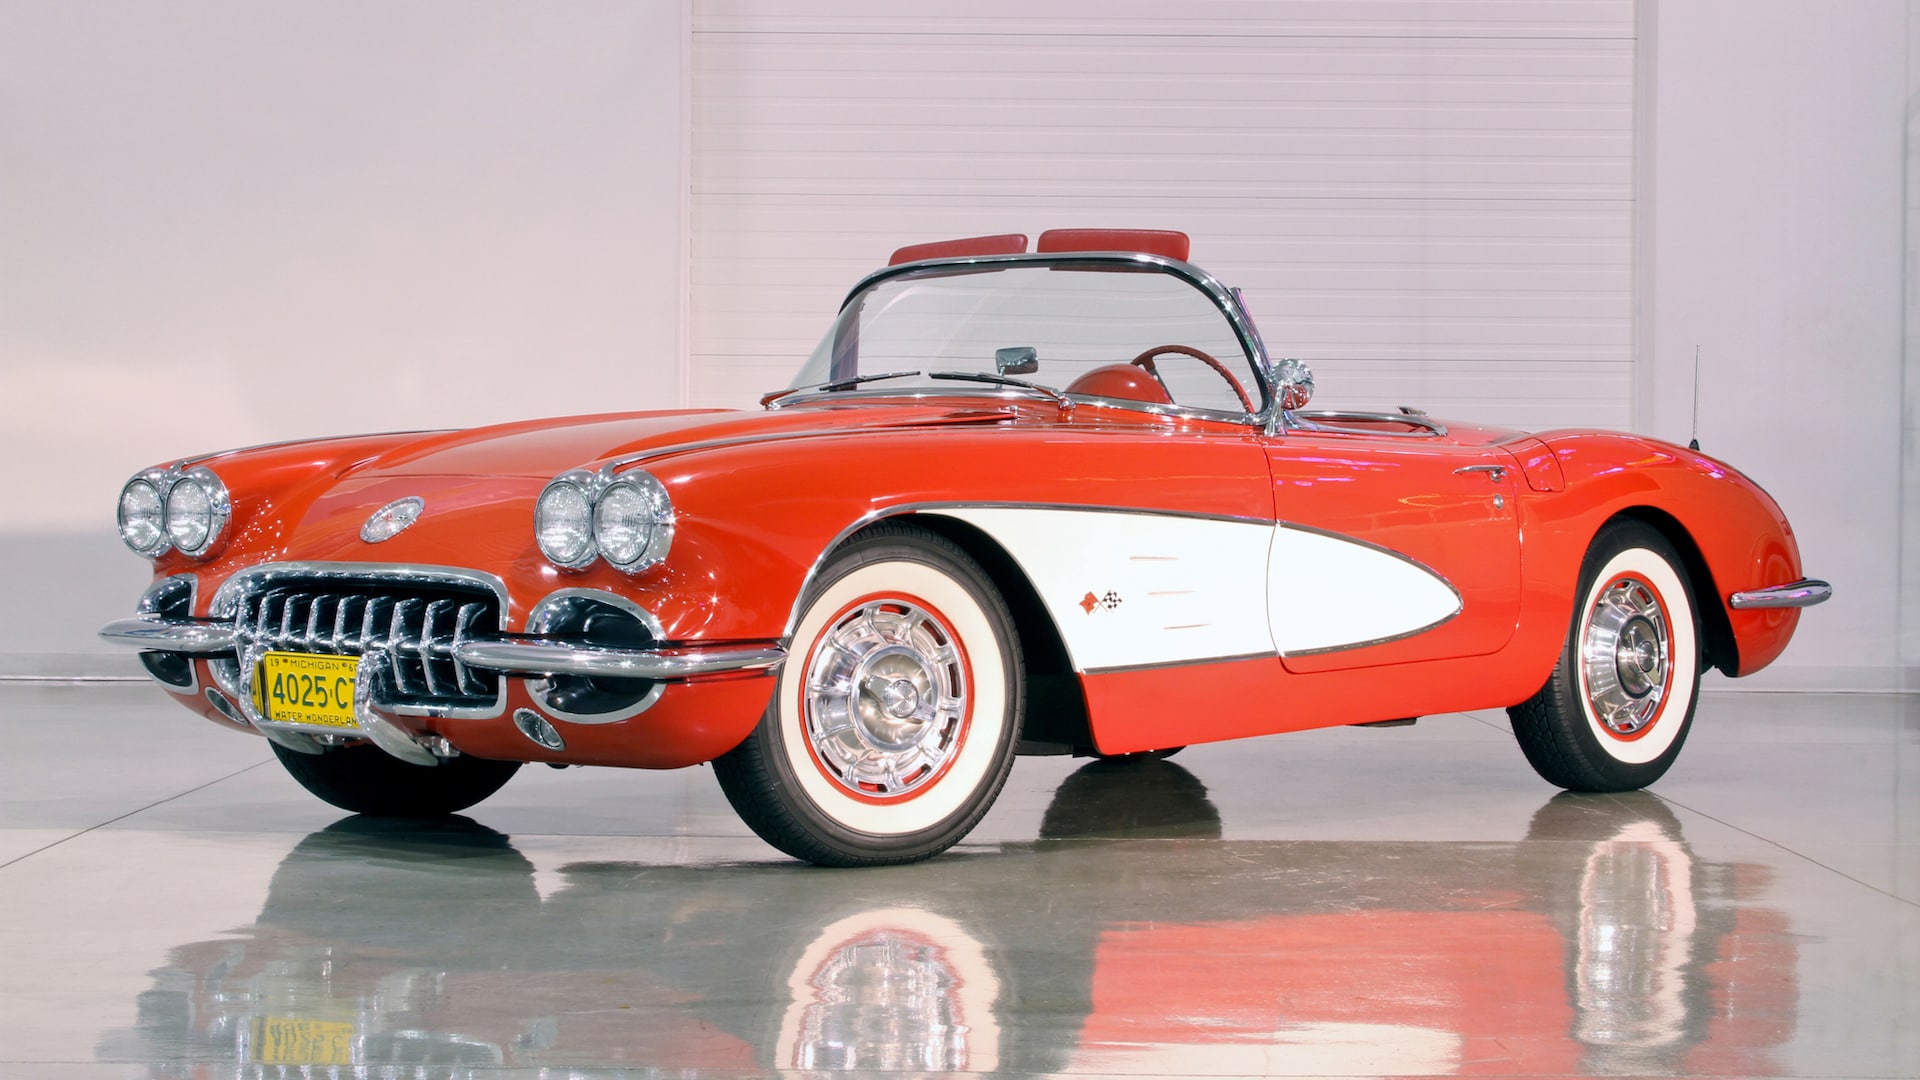 The Chevrolet Corvette: History, Buying Tips, and More